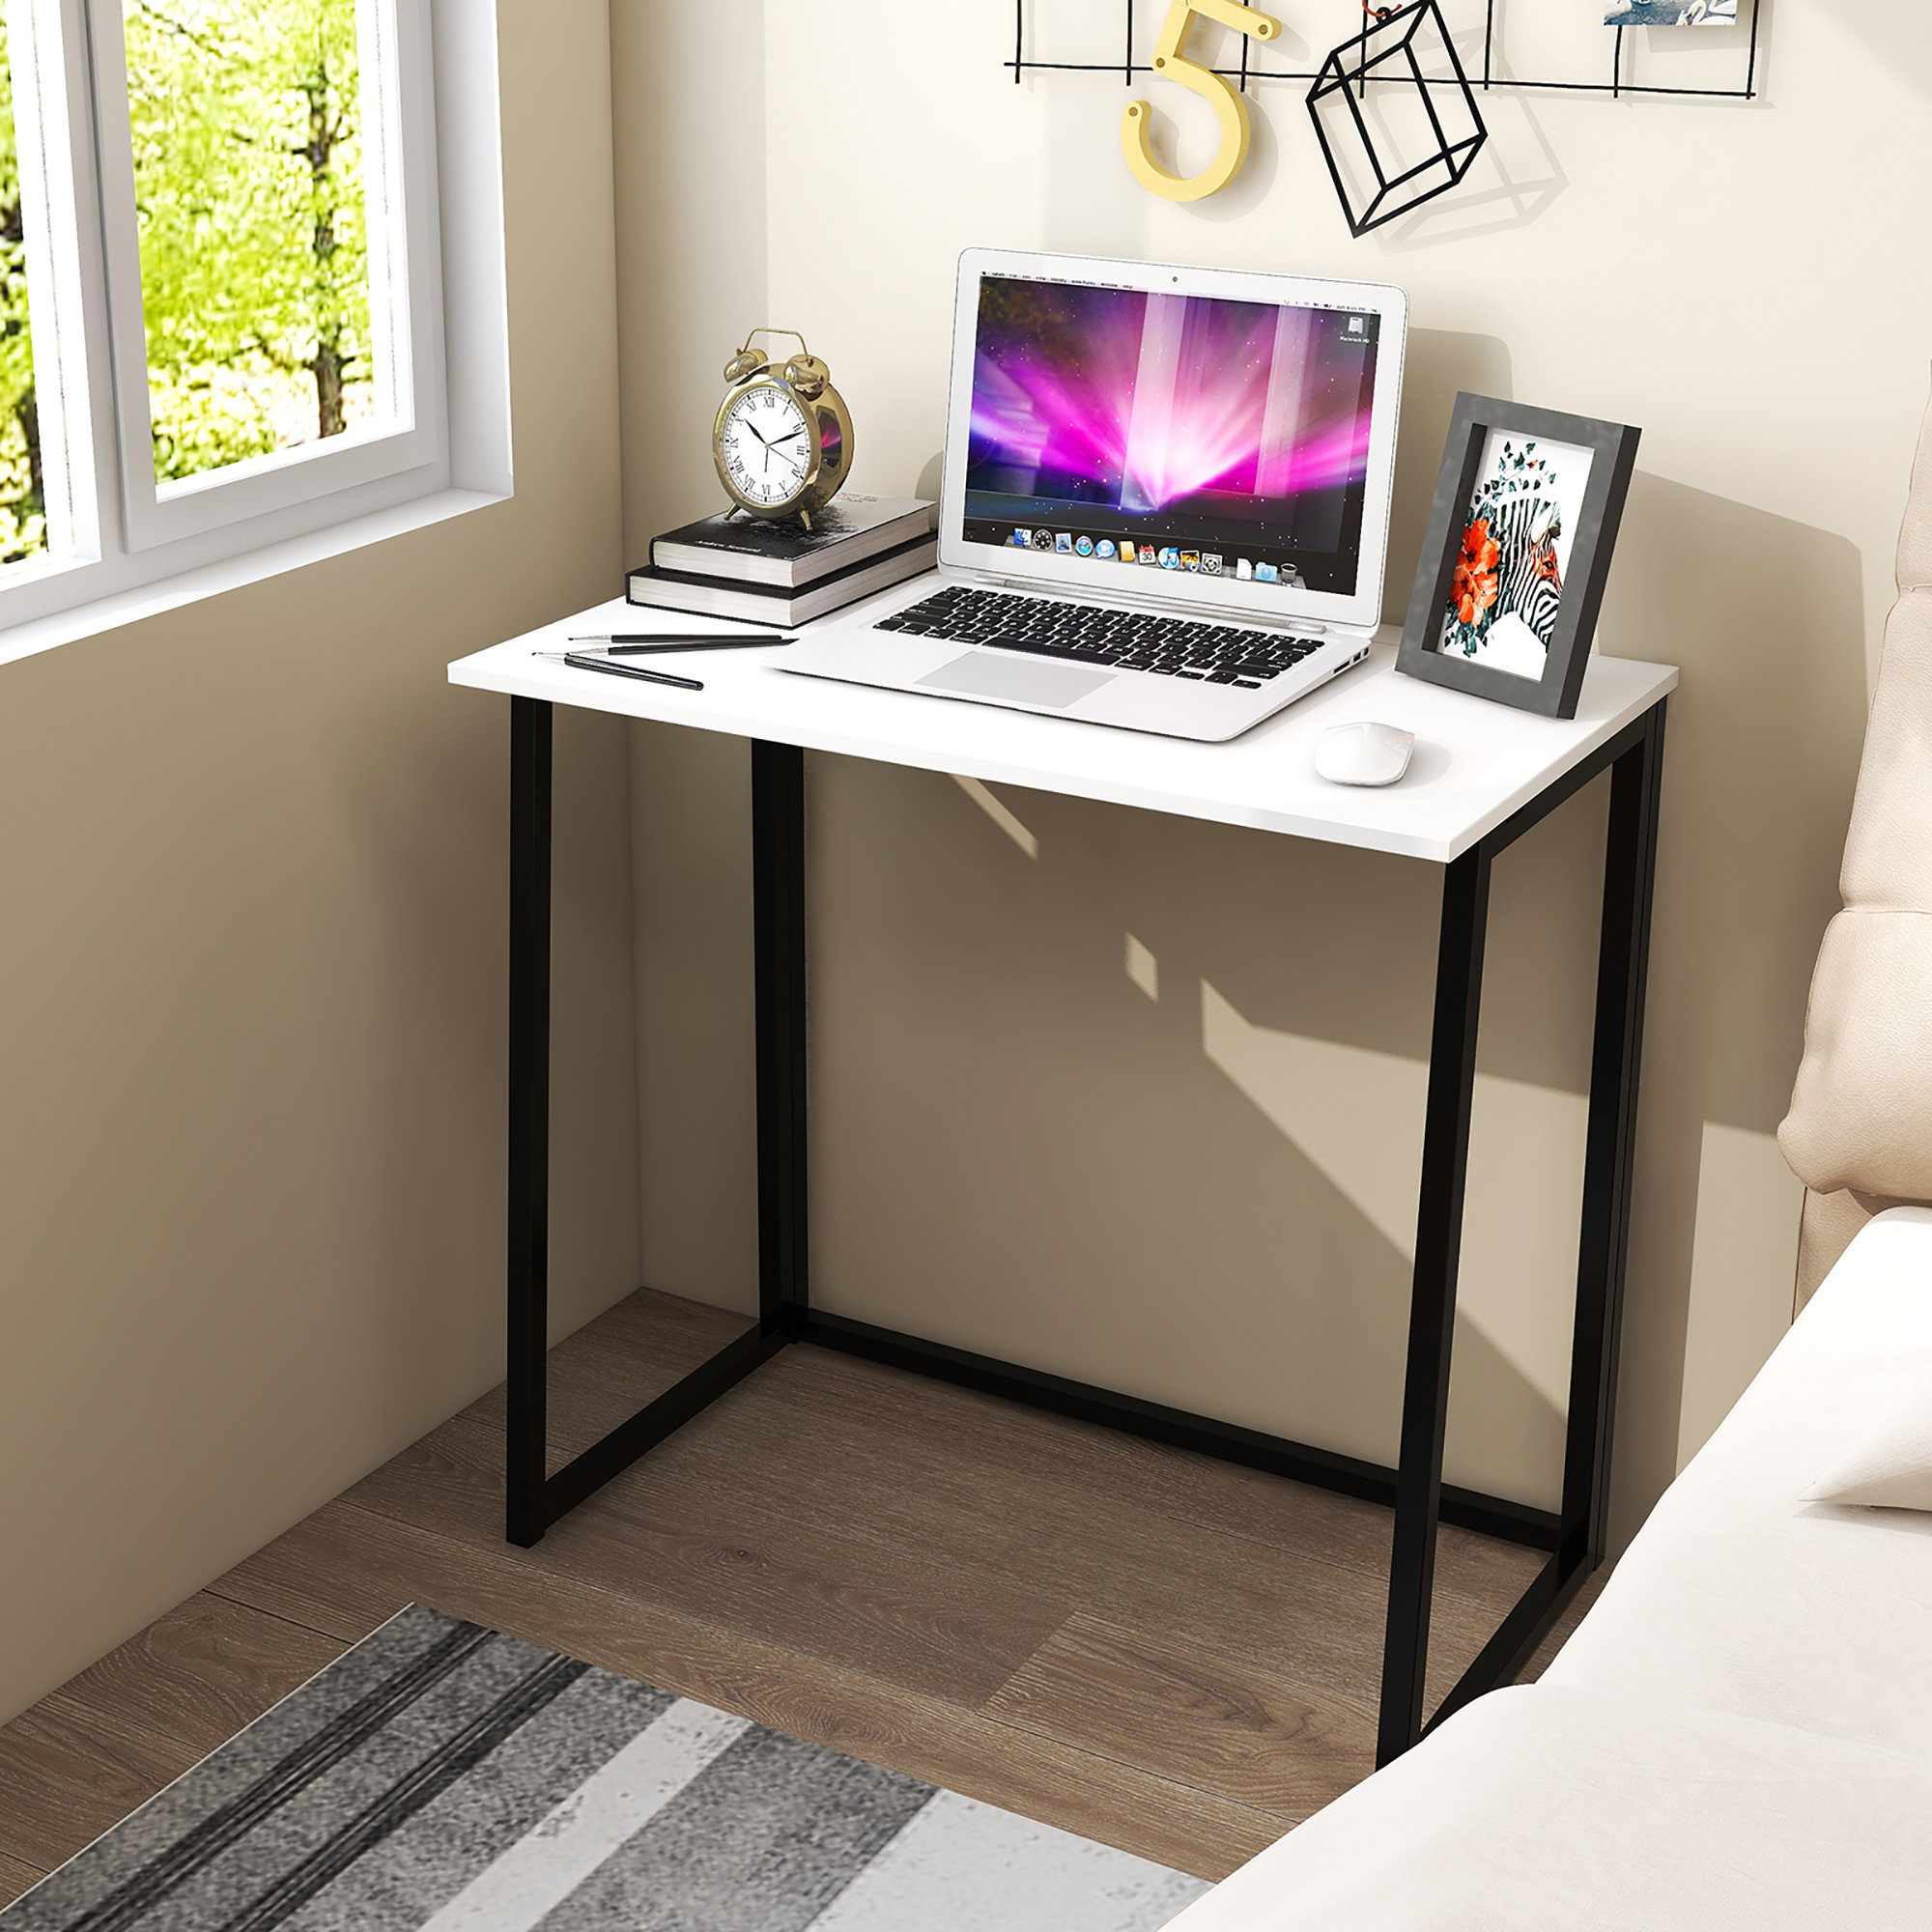 ErgoDesign Folding Computer Desk for Small Spaces, Simple Space-Saving Home Office Desk, Foldable Computer Table, Laptop Table, Writing Desk, Compact